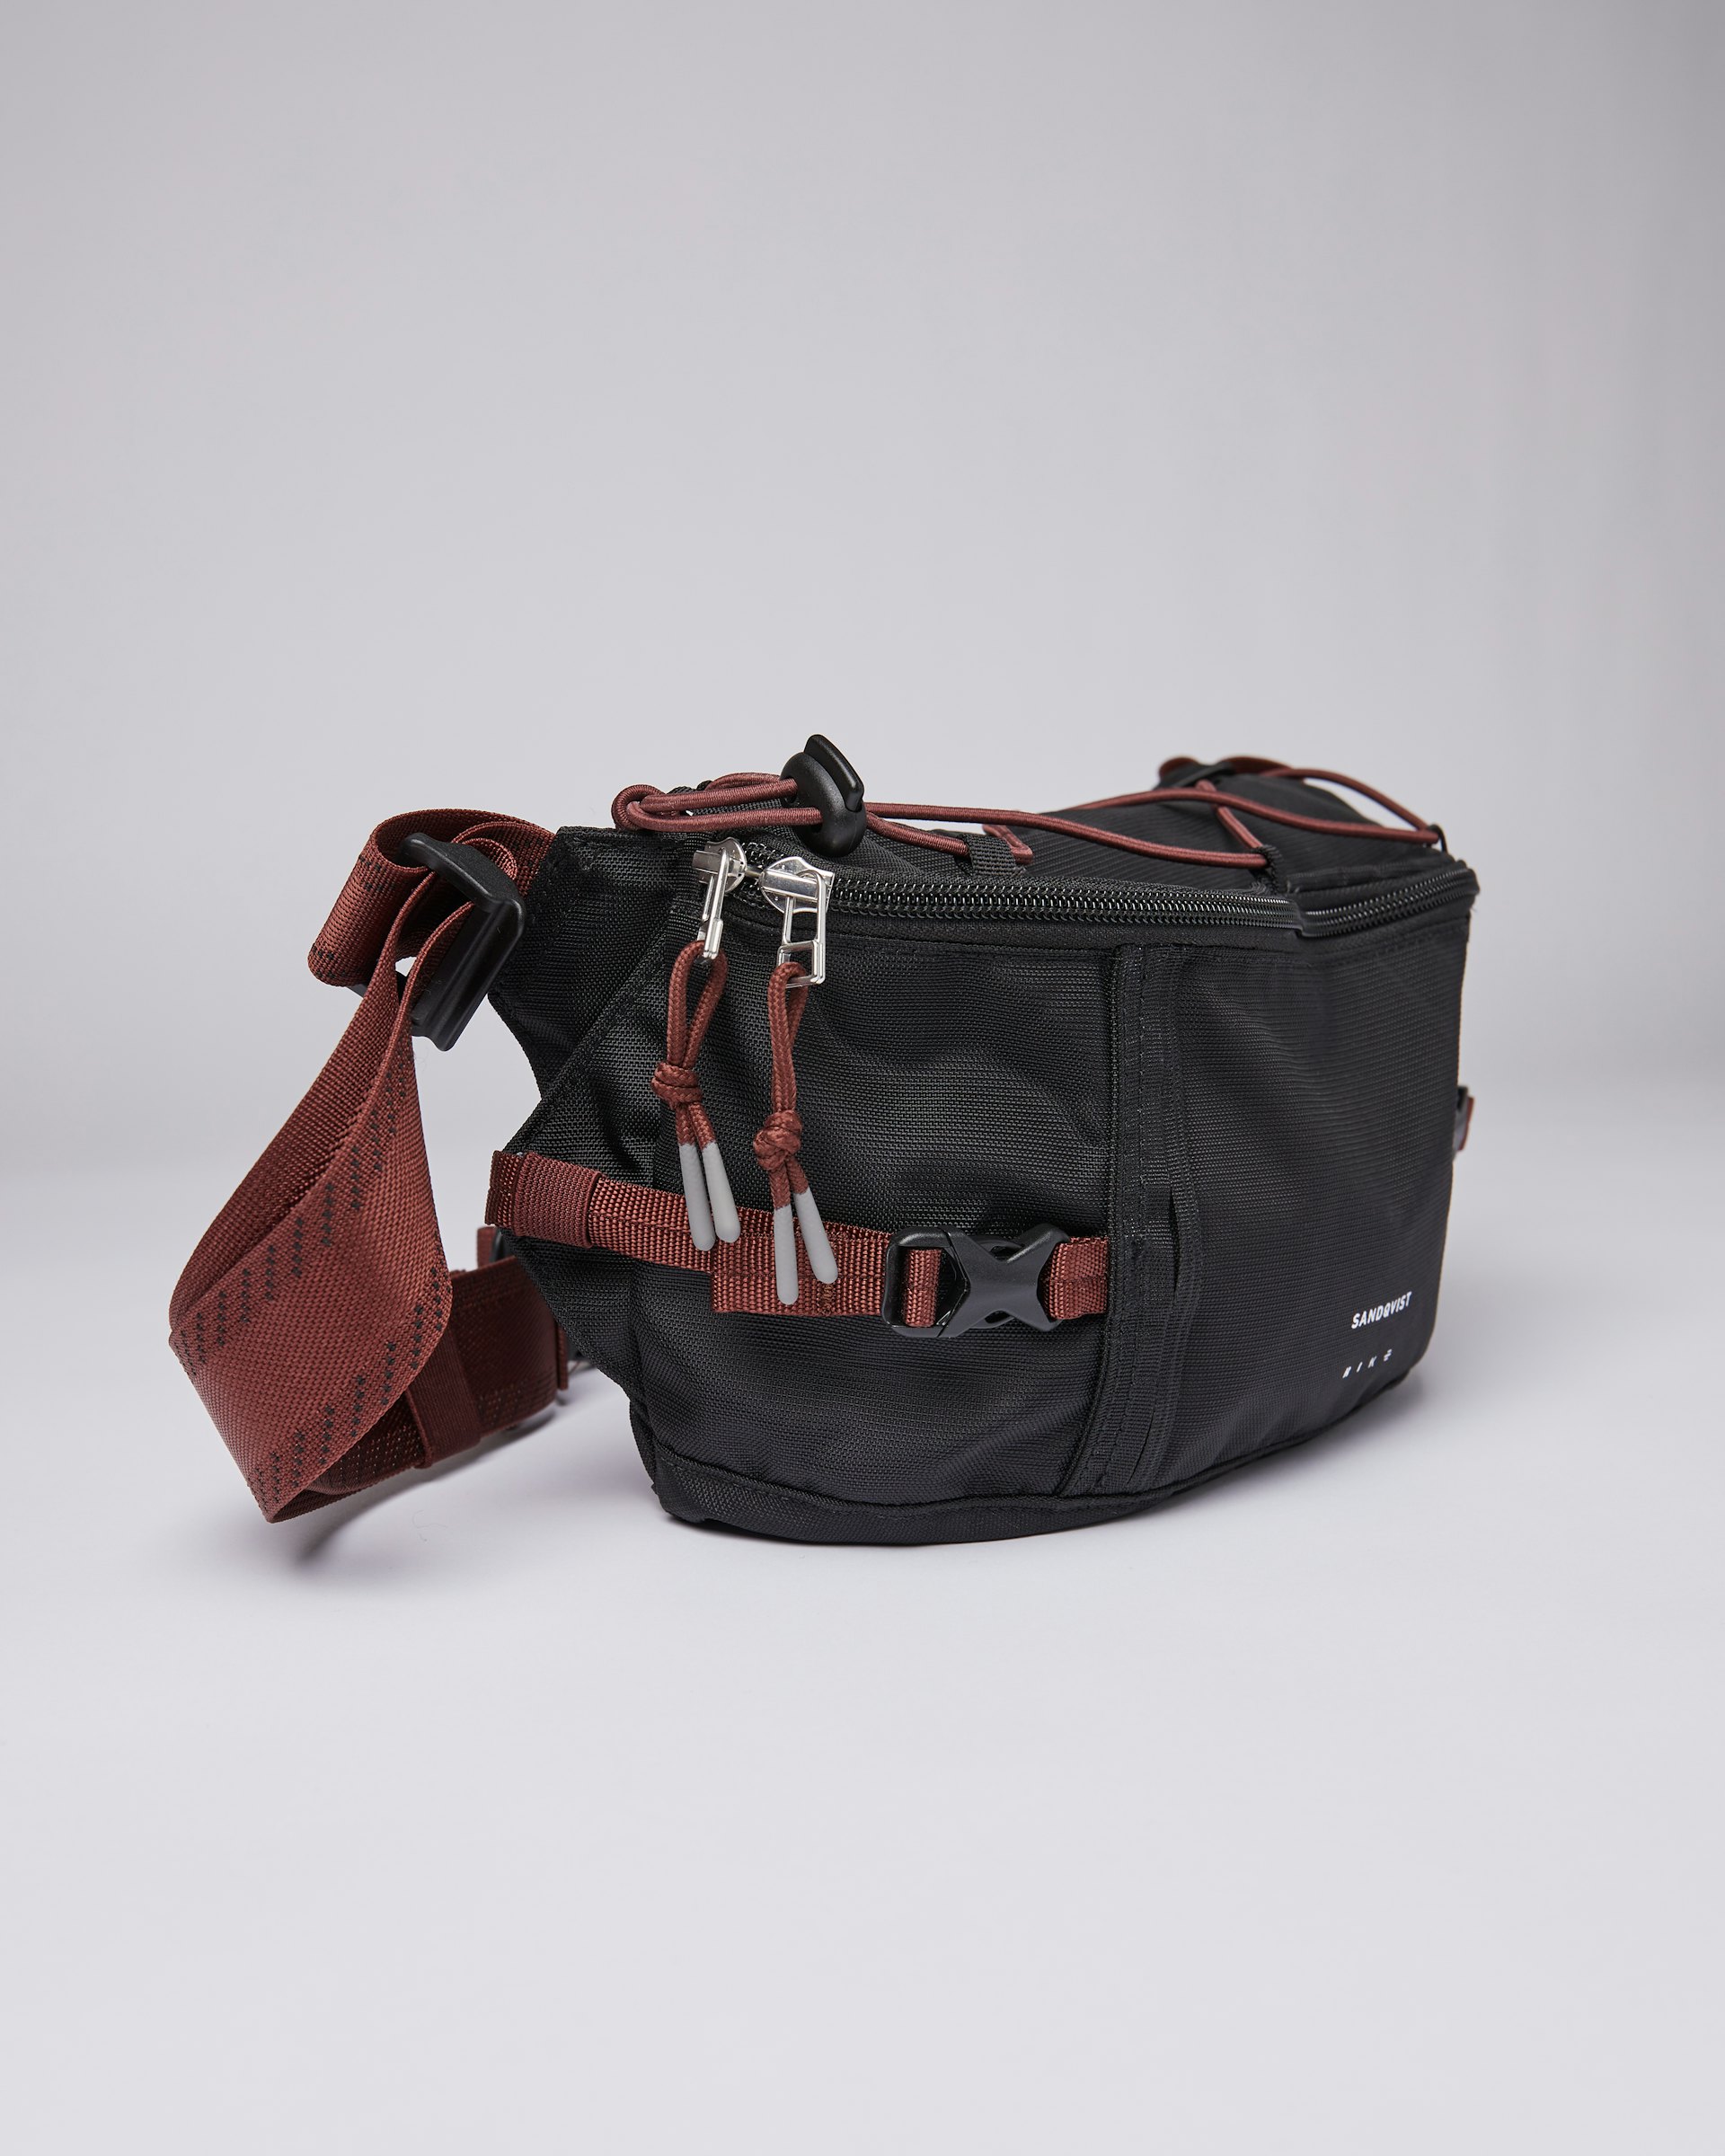 Allterrain Hike belongs to the category Bum bags and is in color black (4 of 7)